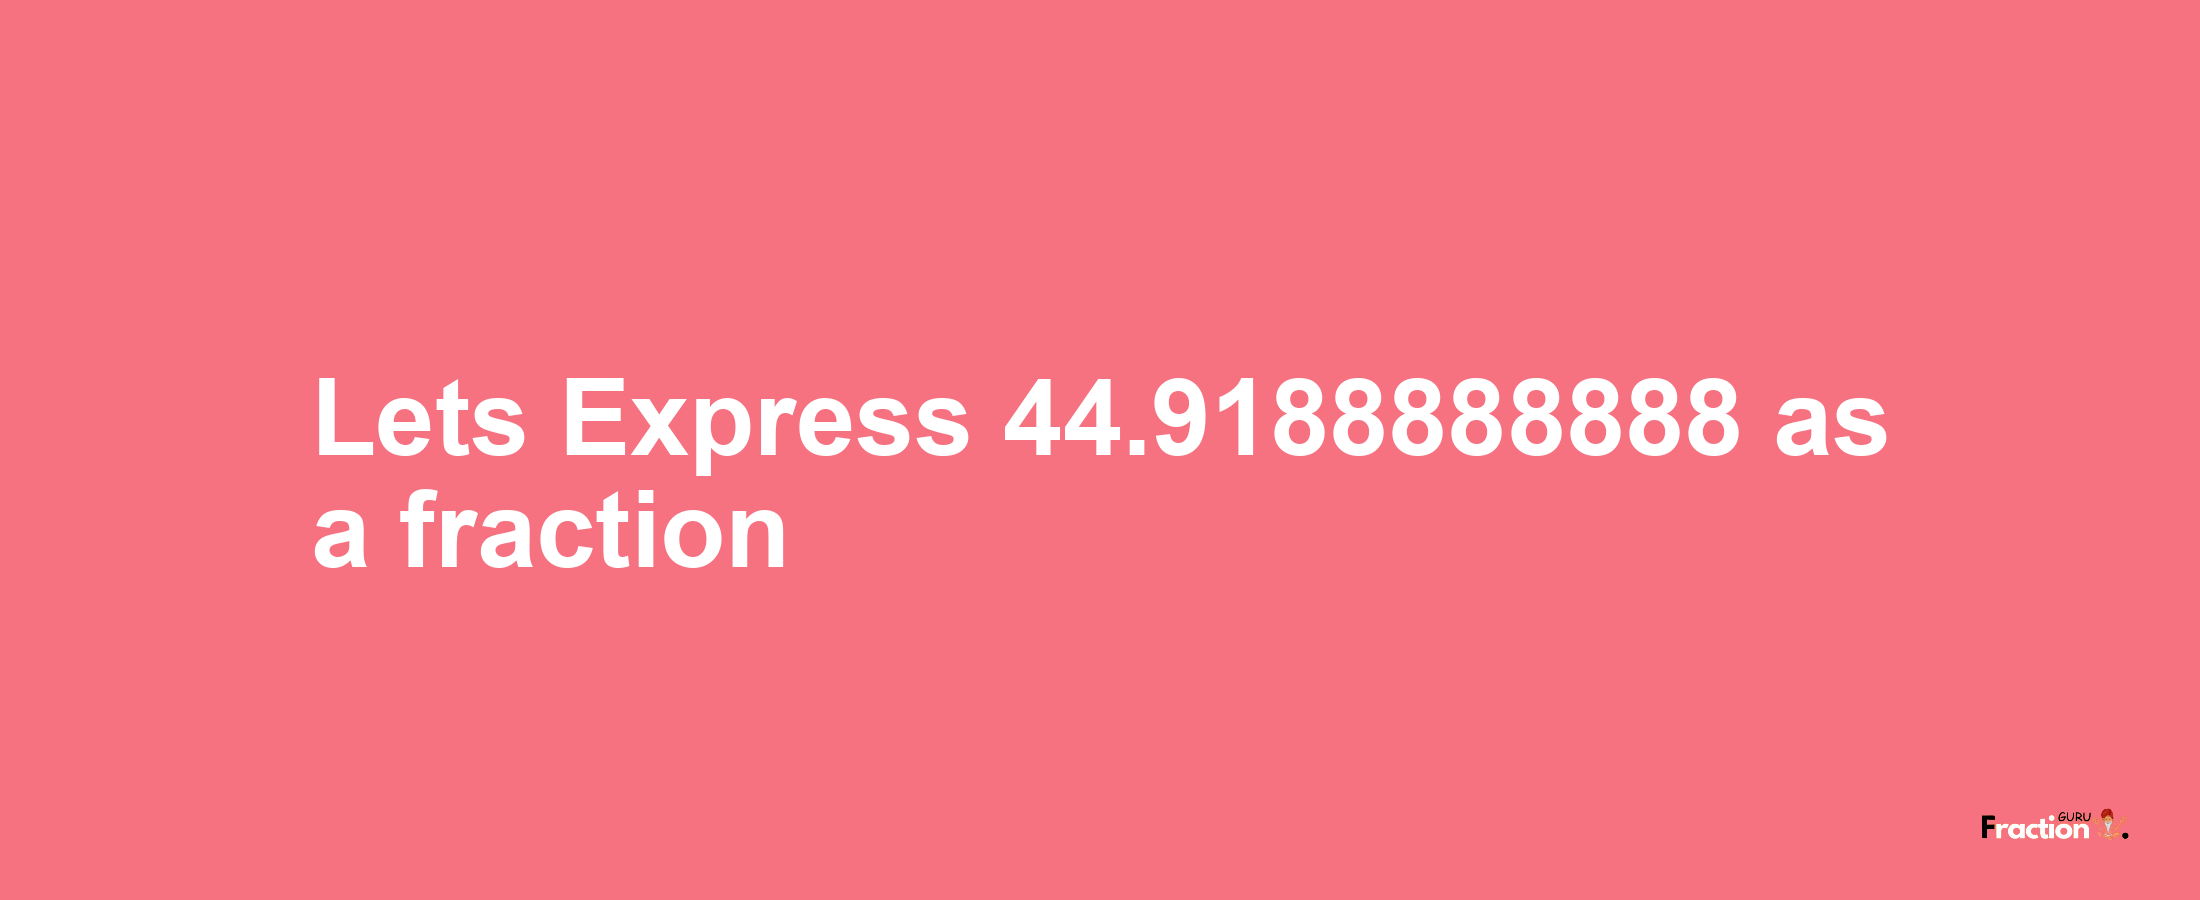 Lets Express 44.9188888888 as afraction